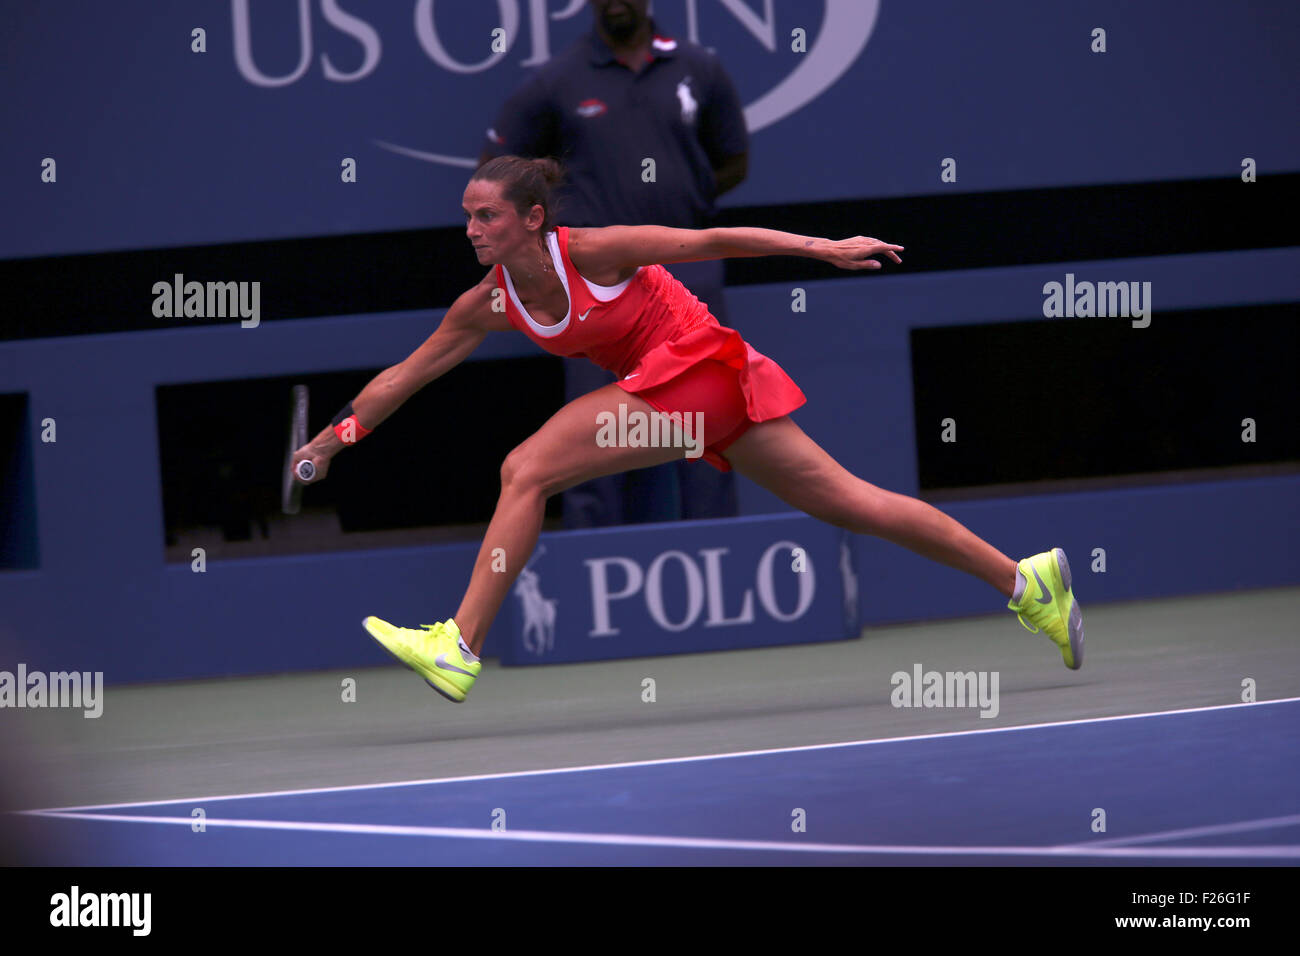 New York, USA. 12th Sep, 2015. Roberta Vinci of Italy reaches for a shot to countrywoman Flavia Penetta during the women's final of the U.S. Open at Flushing Meadows, New York on the afternoon of September 12th, 2015.  Pennetta won the match 7-6 (7-4), 6-2 Credit:  Adam Stoltman/Alamy Live News Stock Photo